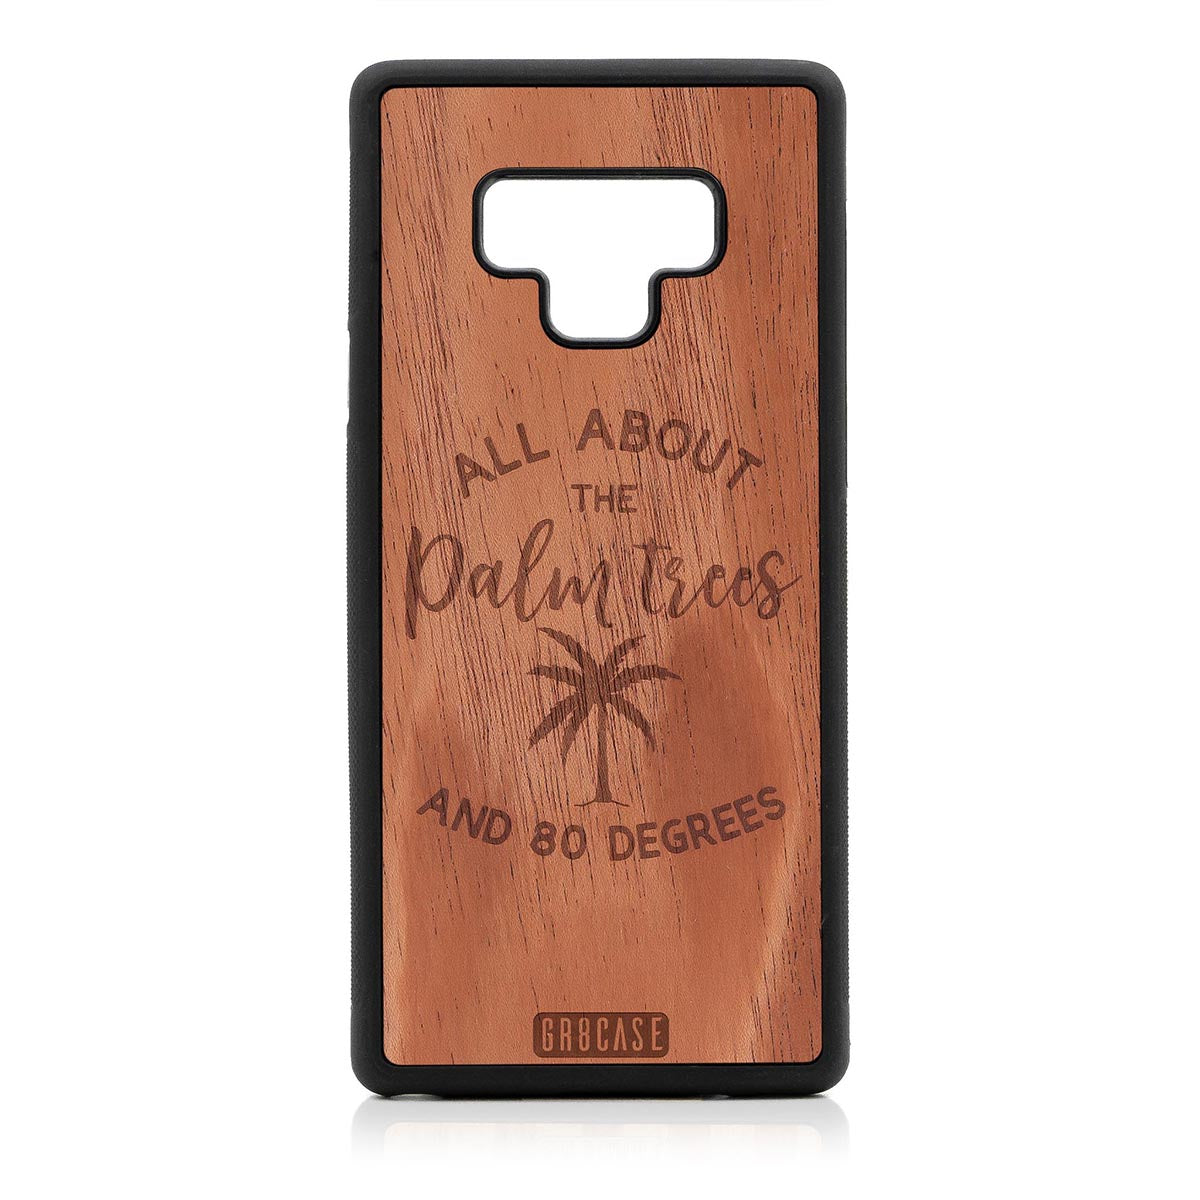 All About The Palm Trees and 80 Degrees Design Wood Case For Samsung Galaxy Note 9 by GR8CASE